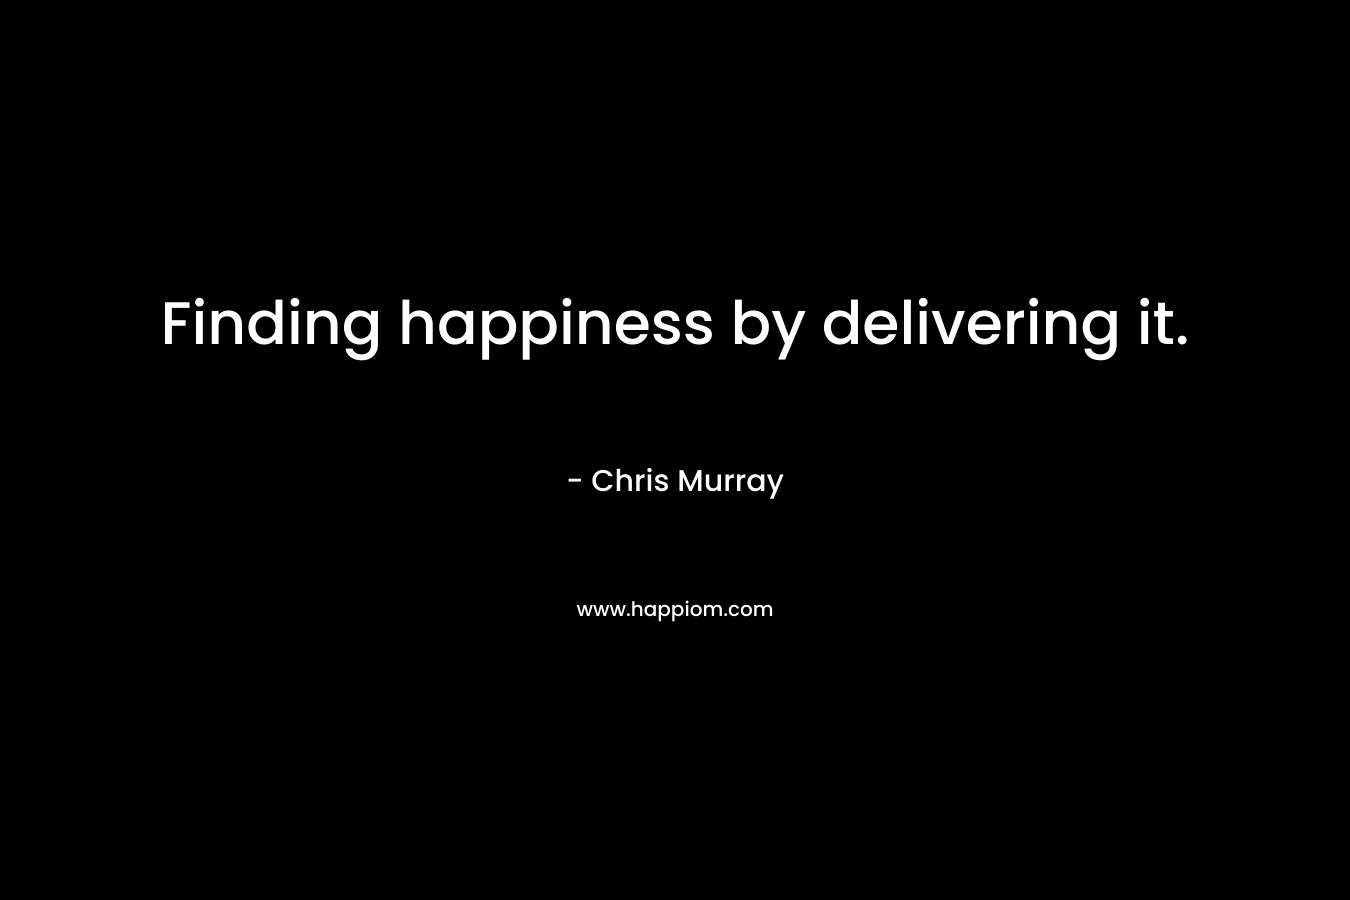 Finding happiness by delivering it.